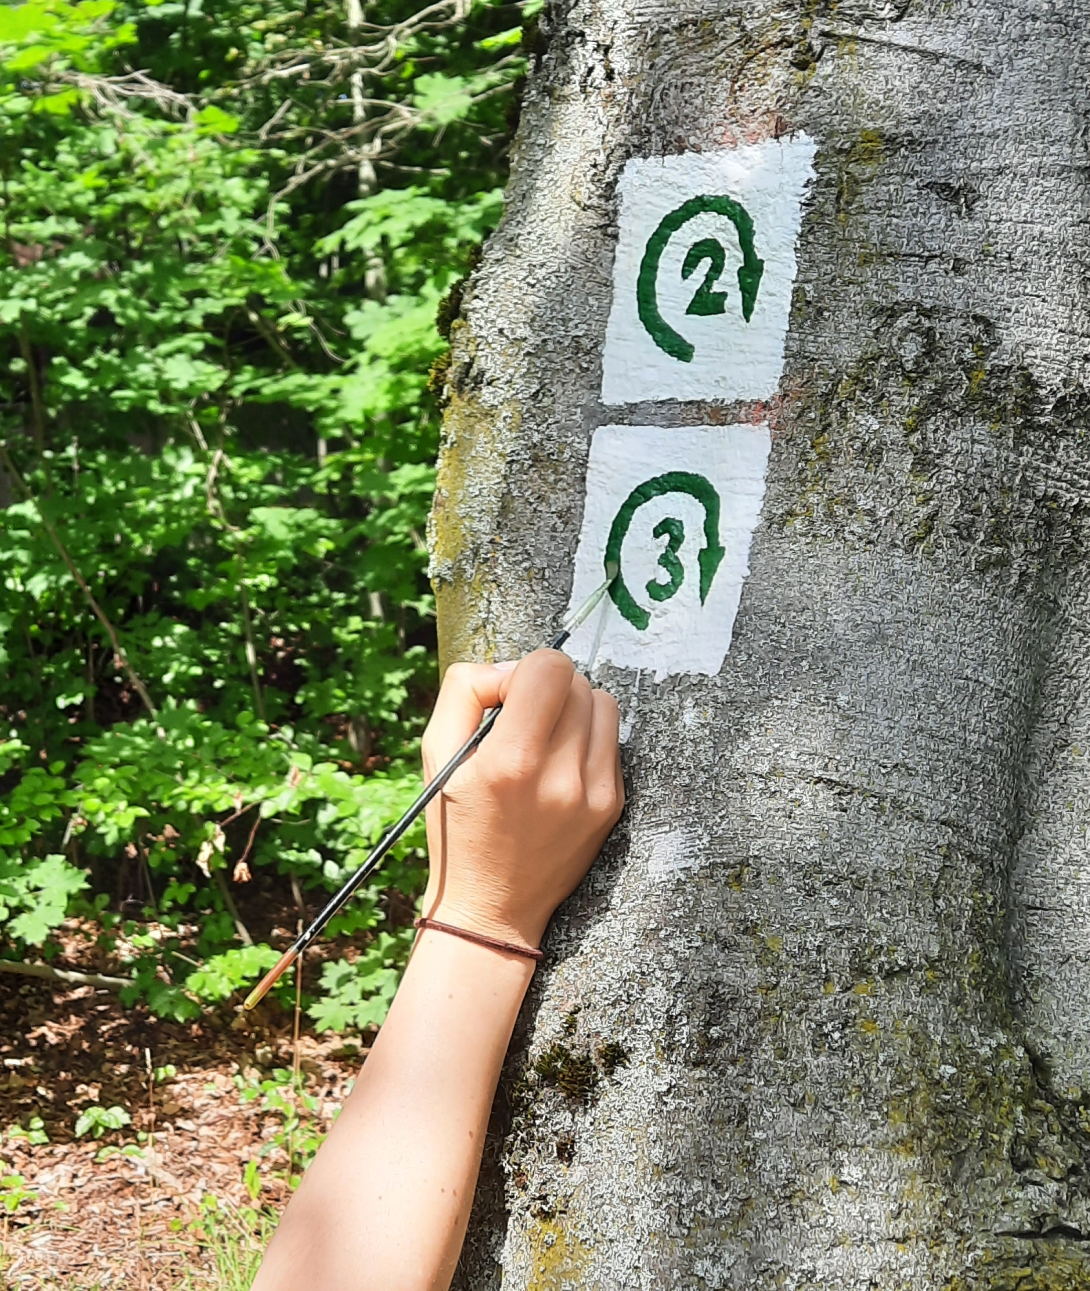 Circular hiking trail - Some of the hiking trails are still marked by hand